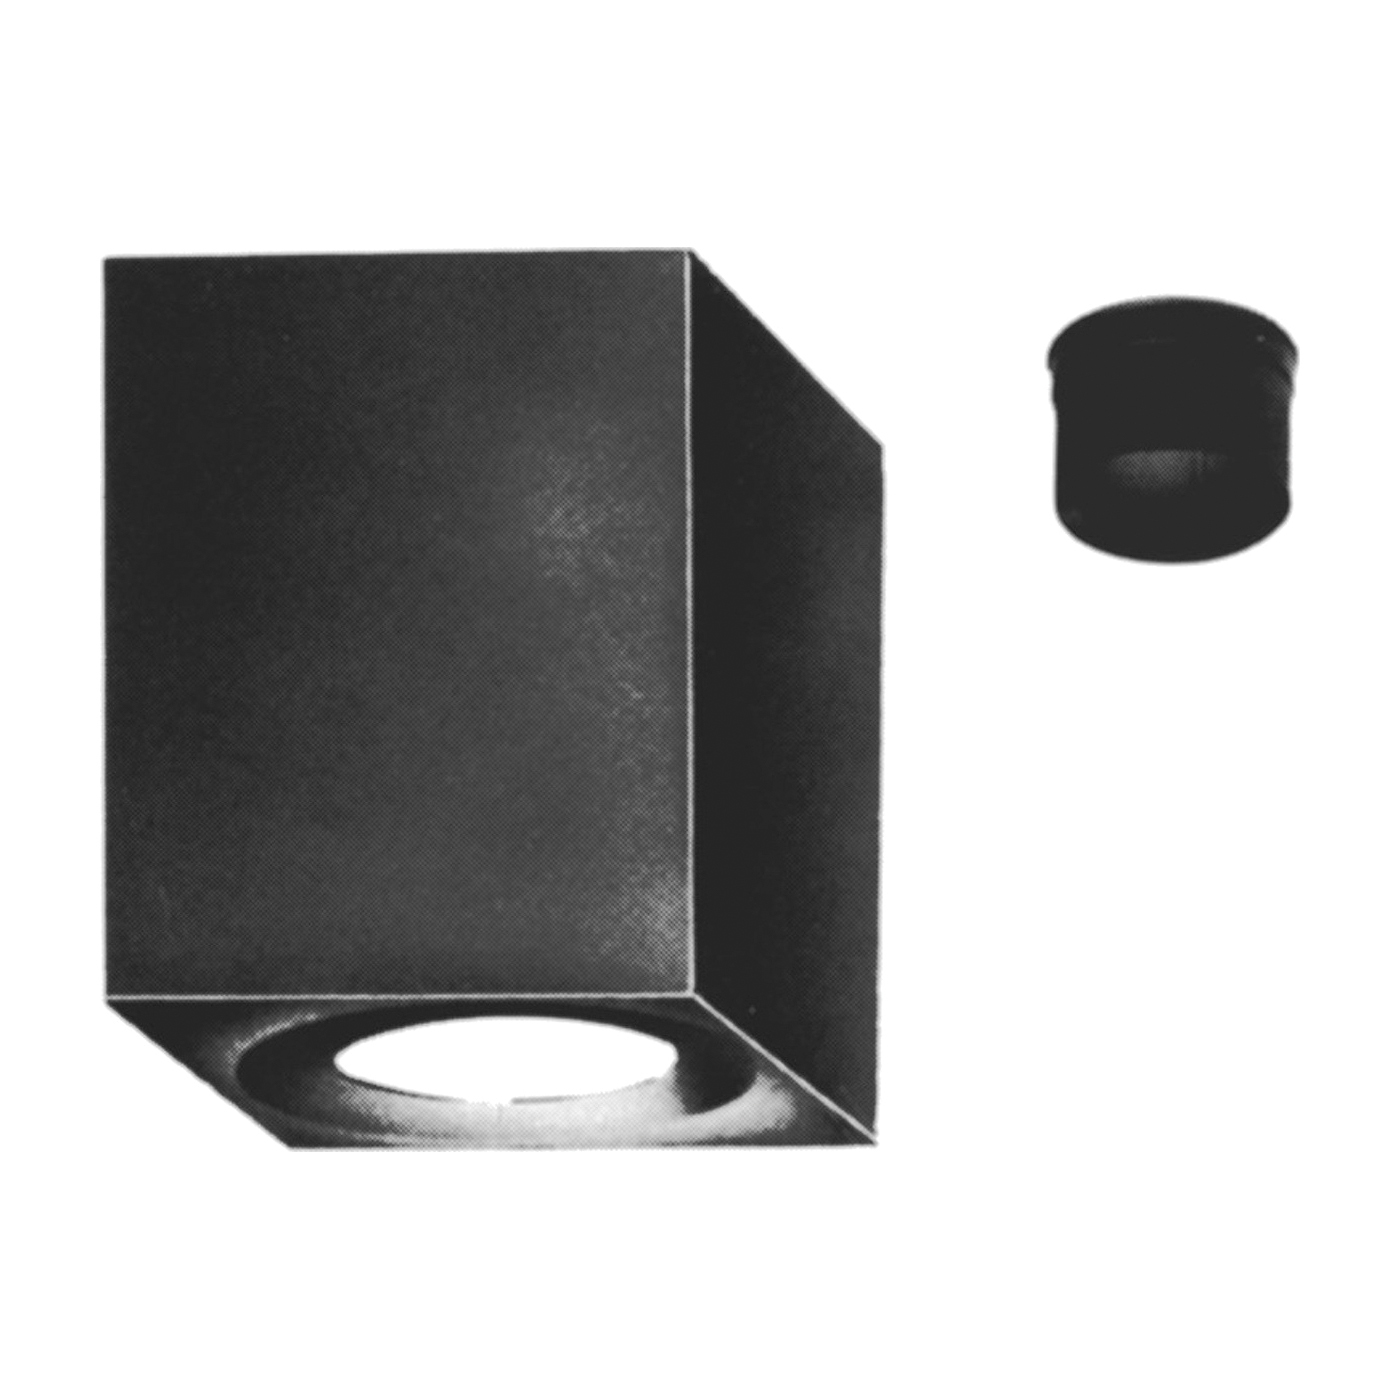 6HS-RSA12 Roof Support Box, Black